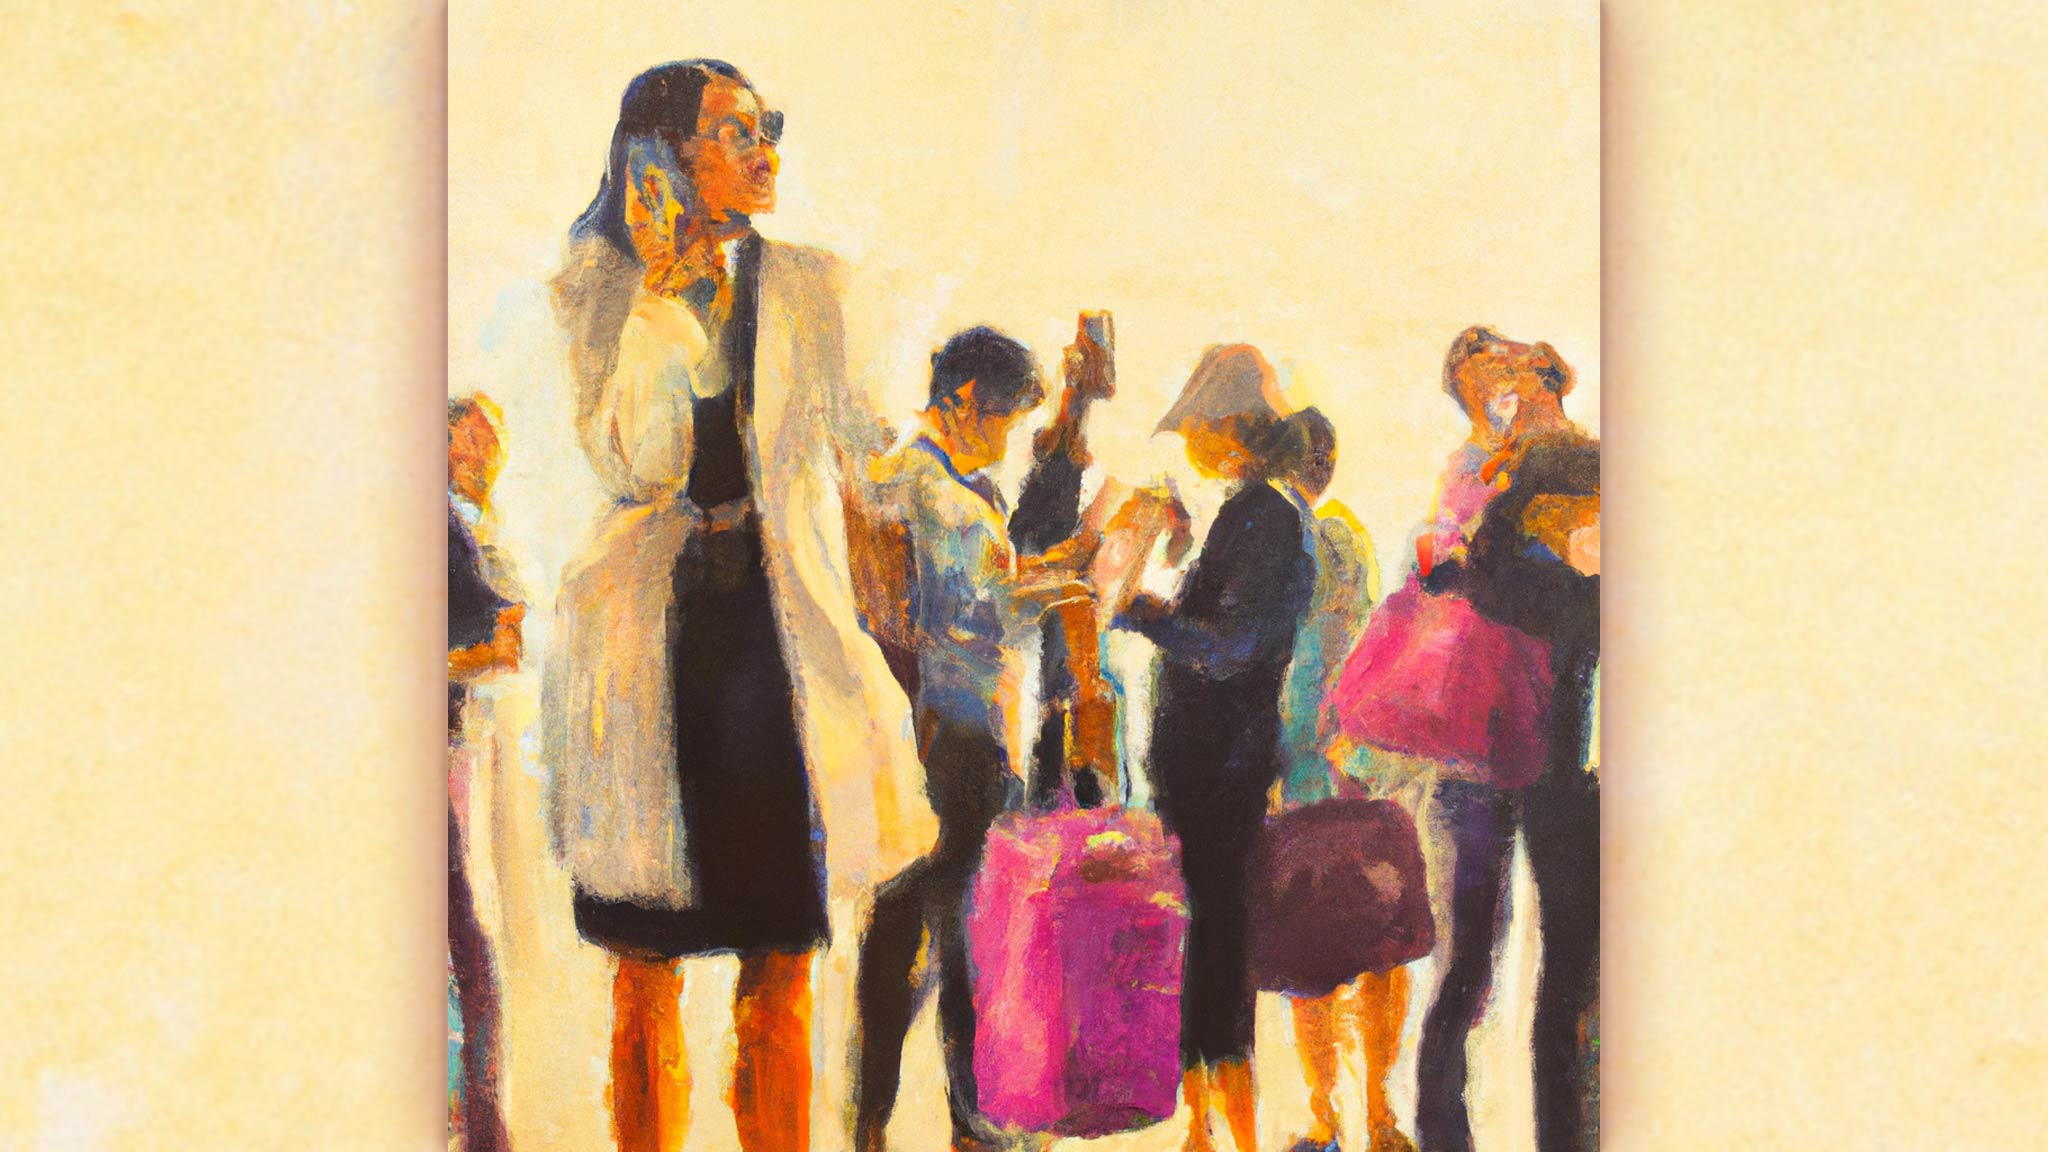 Impressionist Oil Painting Of Travelers In Busy Airport, International Relocation Concept